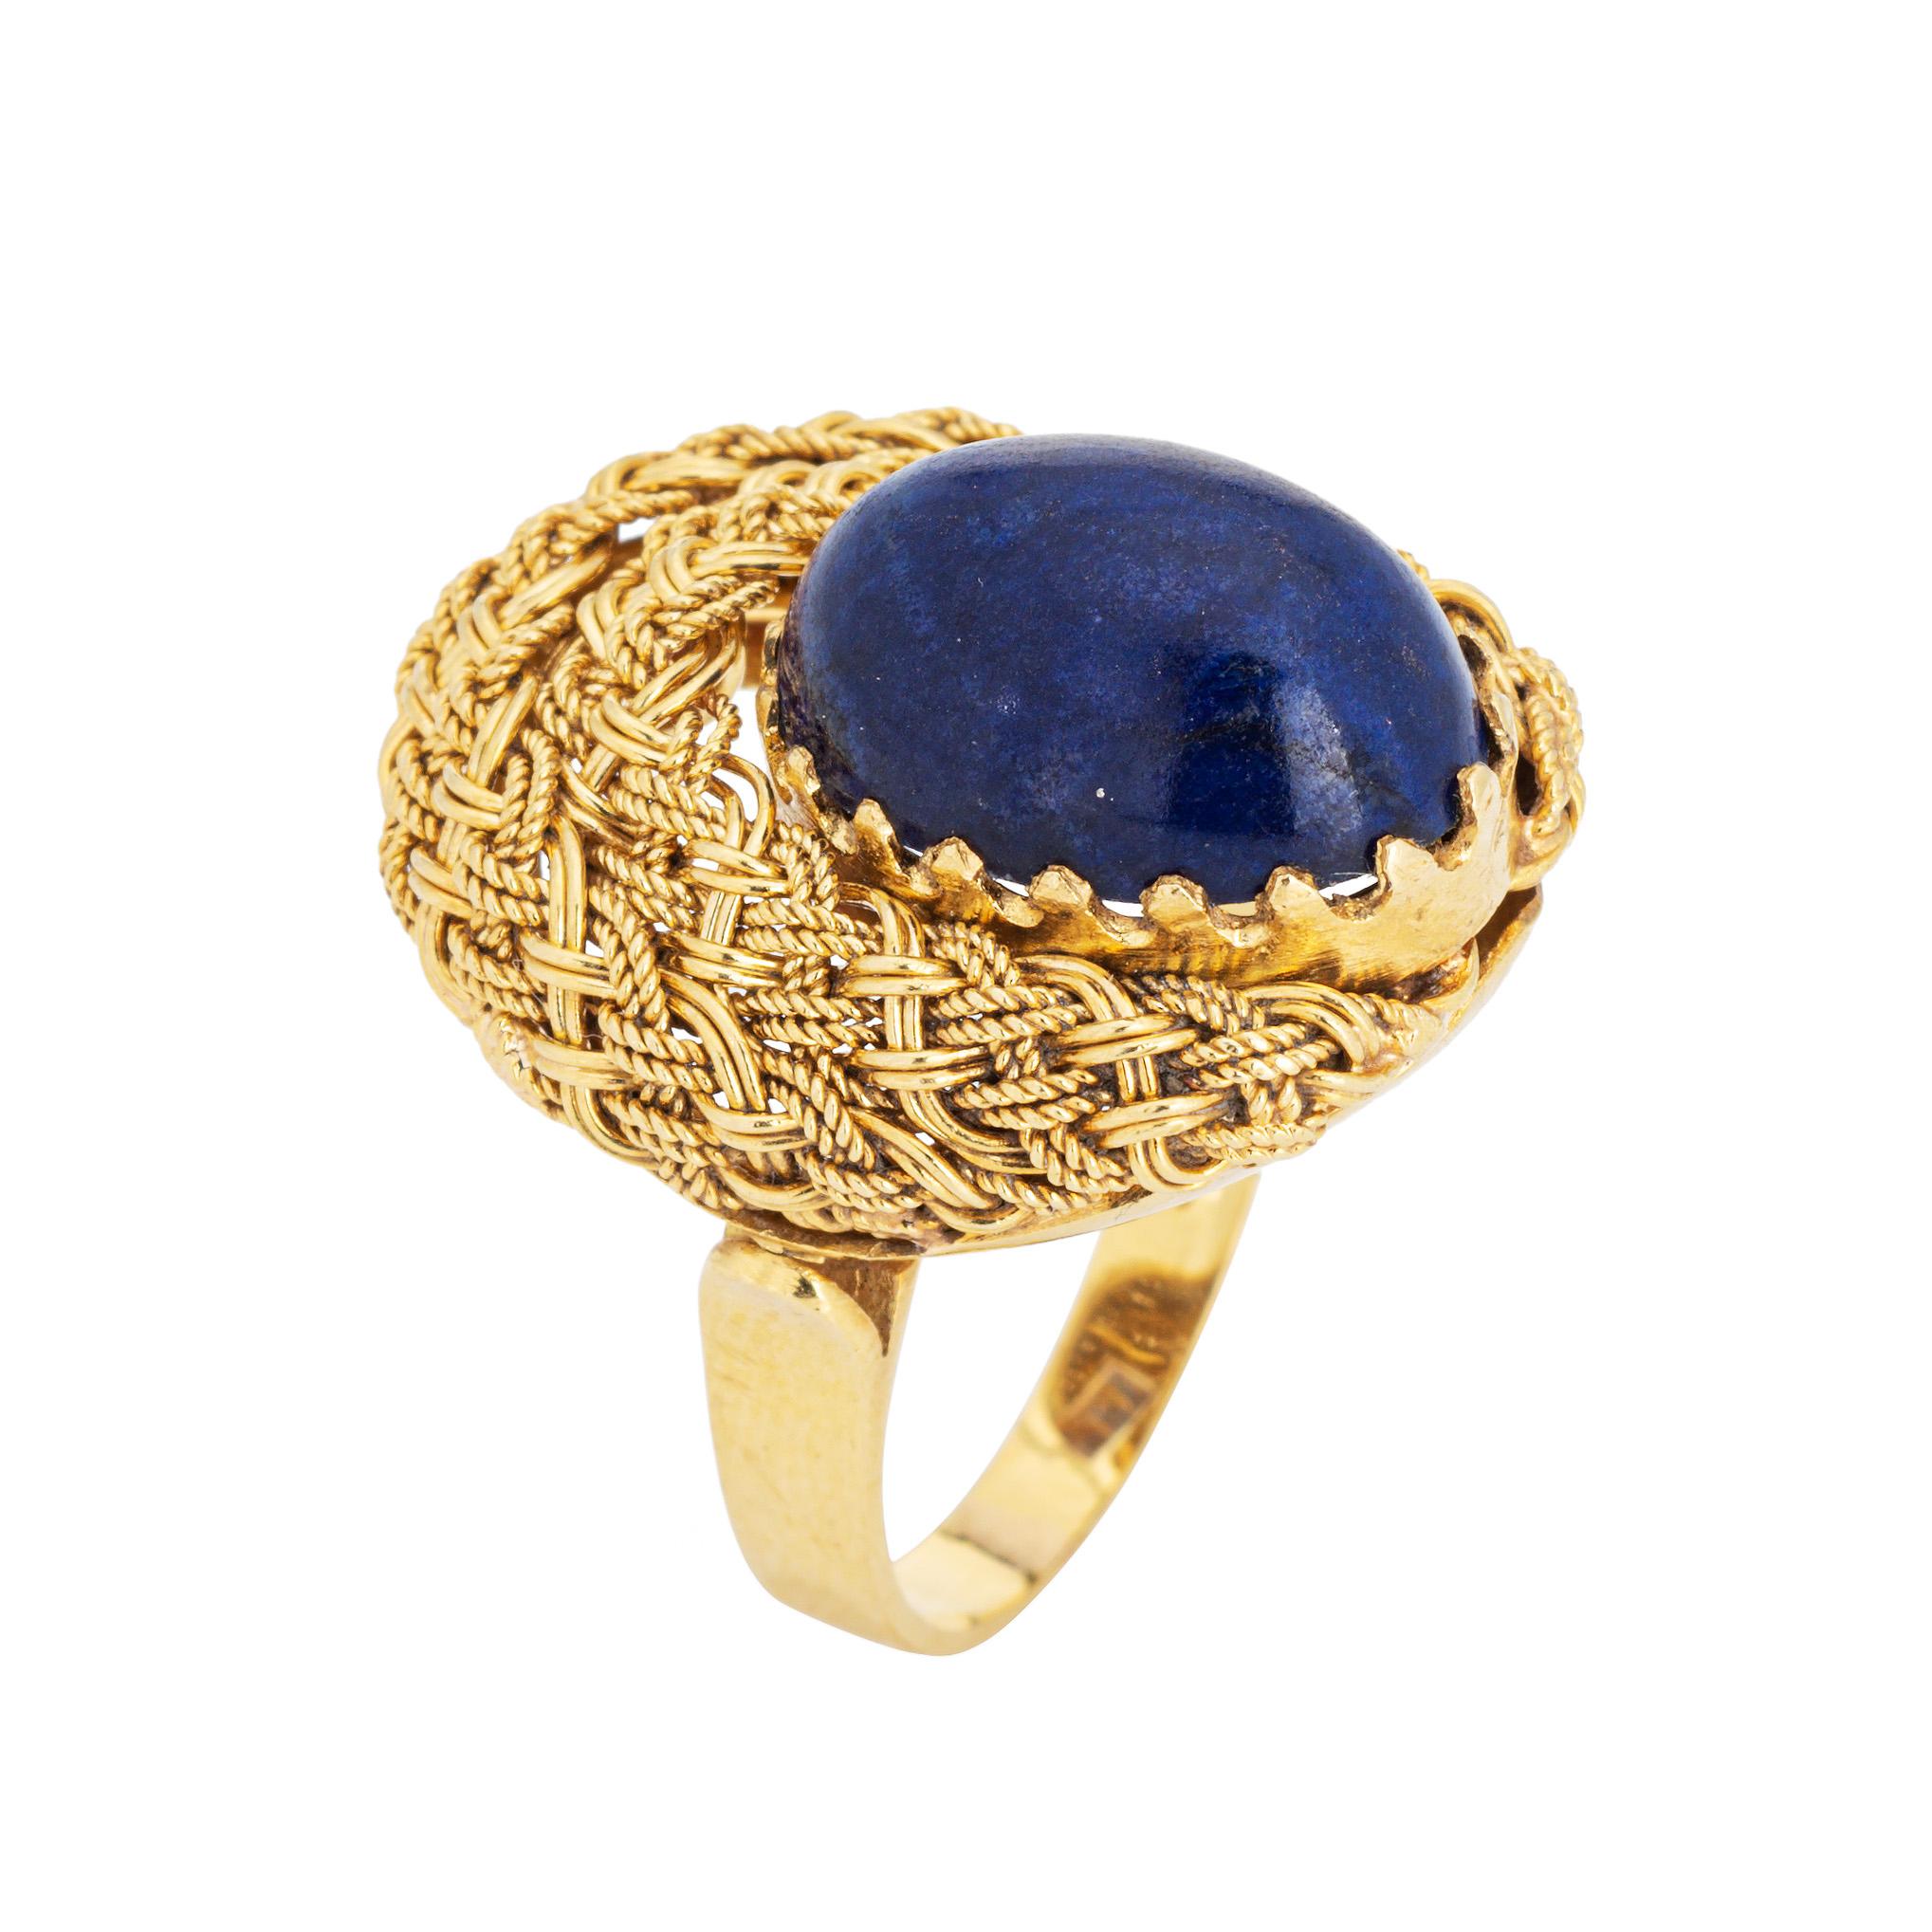 Stylish lapis lazuli cocktail ring crafted in 18 karat yellow gold (circa 1960s to 1970s). 

Cabochon cut lapis lazuli measures 13mm x 10mm. The lapis is in very good condition and free of cracks or chips. 

Rich cobalt blue Lapis lazuli is perched